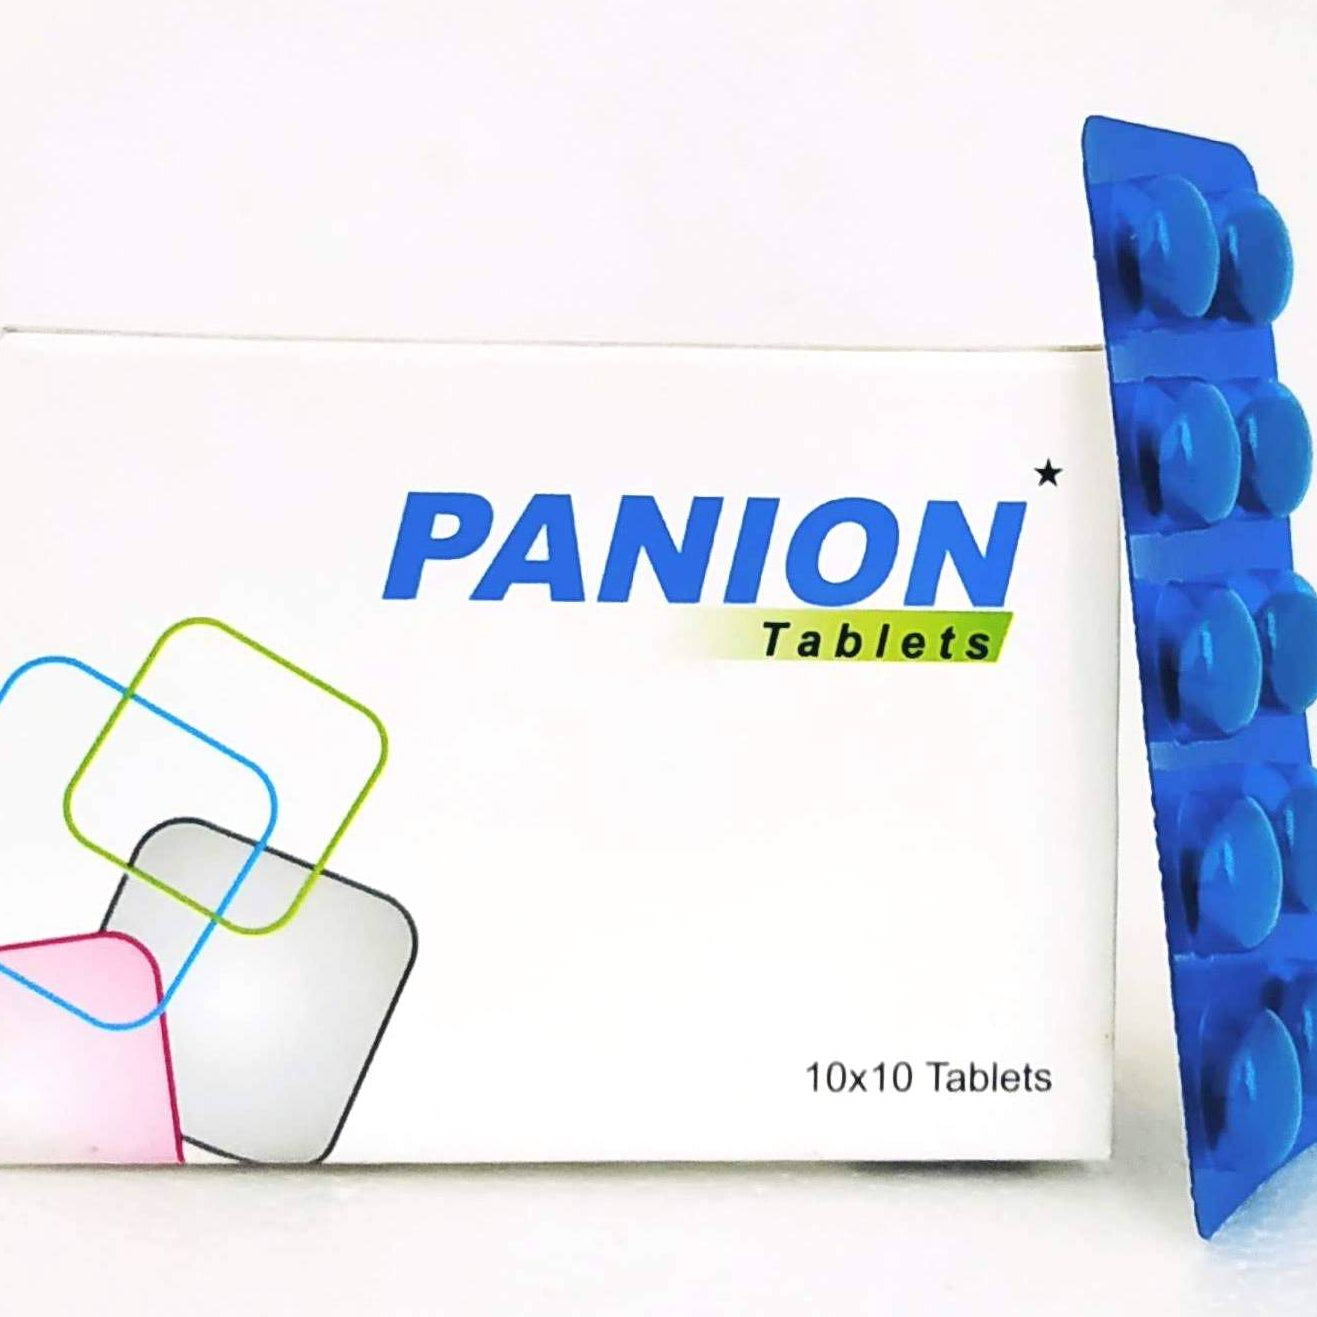 Shop Panion tablets - 10Tablets at price 35.00 from Wintrust Online - Ayush Care